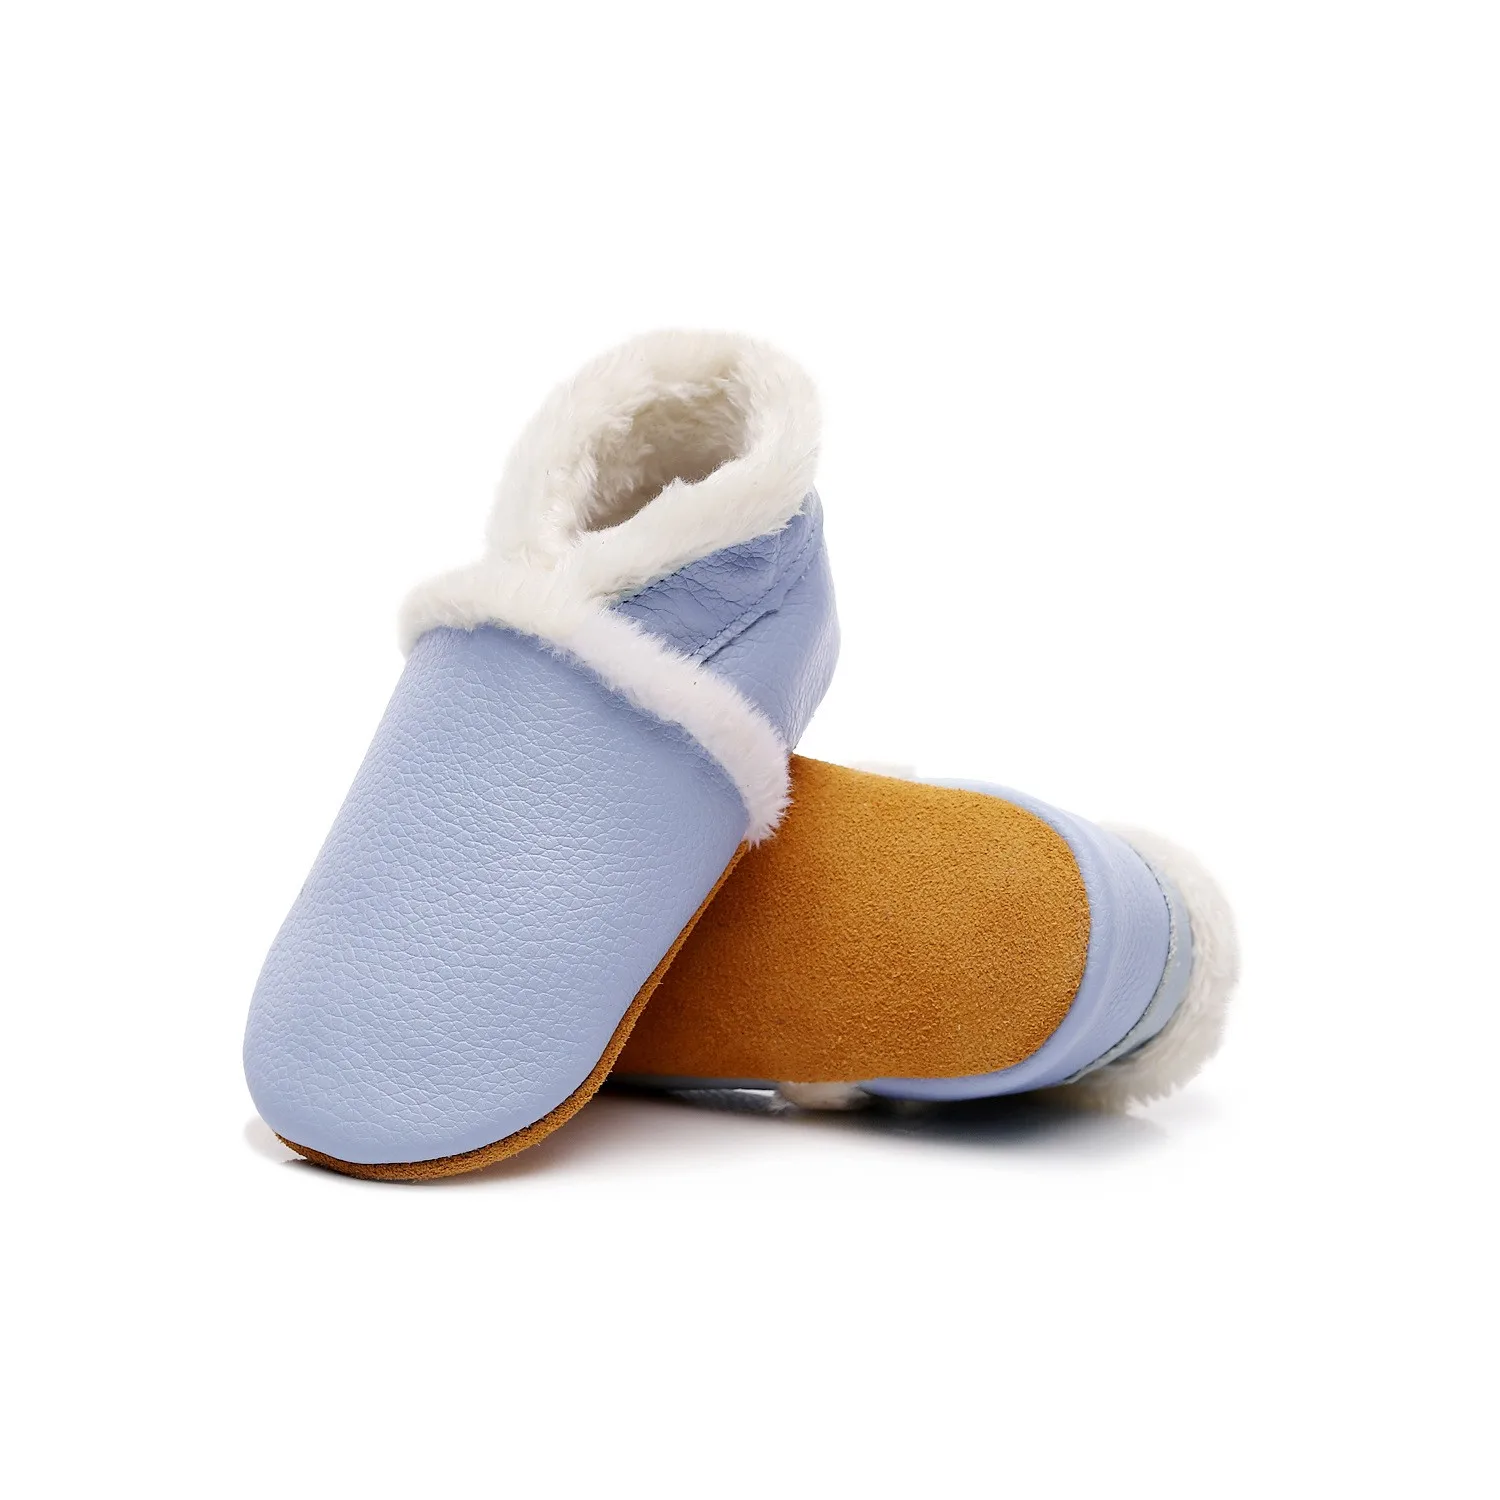 winter baby shoes 25